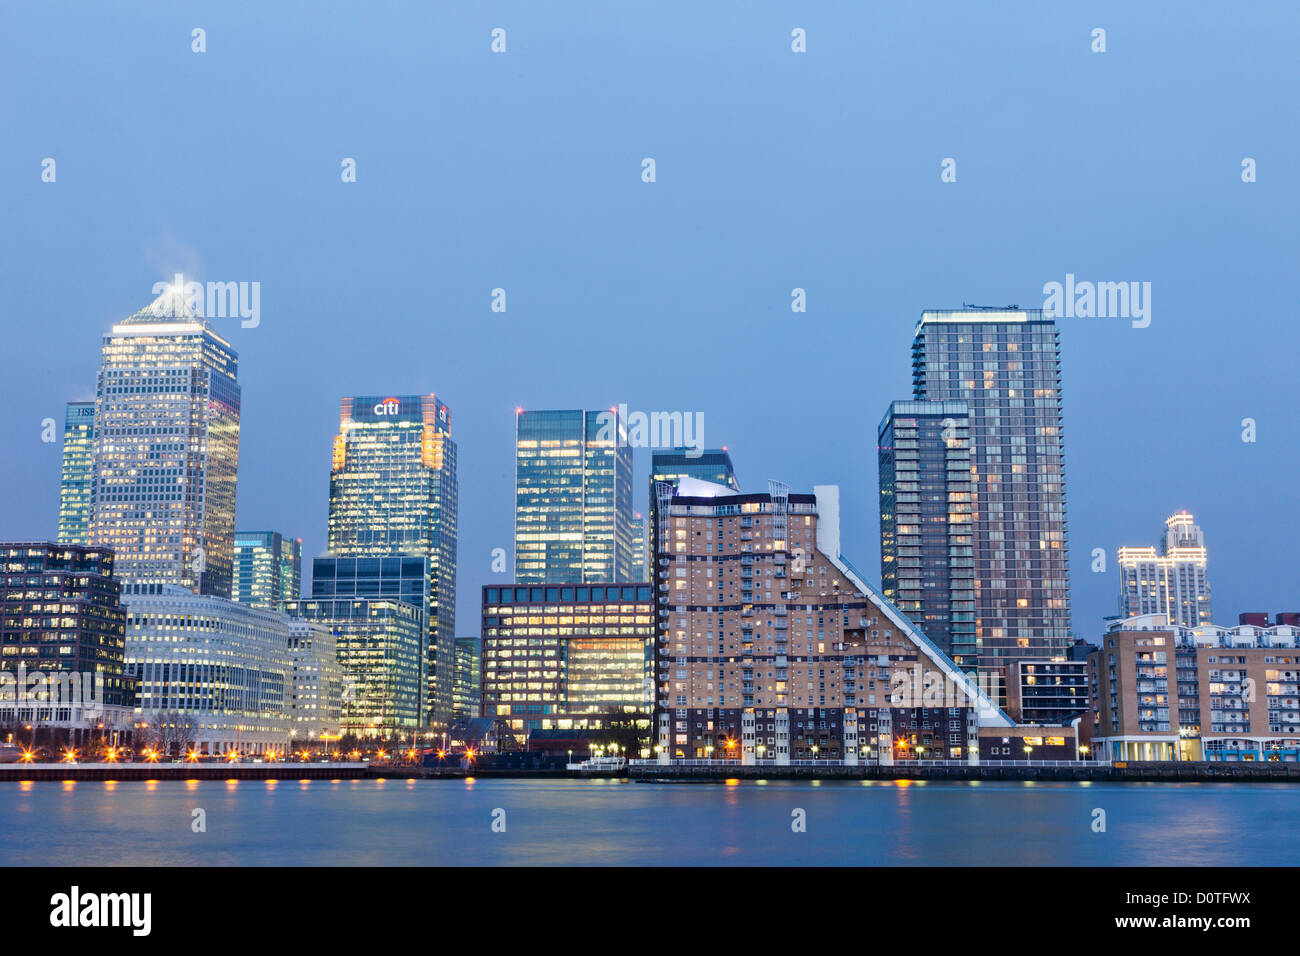 UK, United Kingdom, Great Britain, Britain, England, London, Docklands, Canary Wharf, Skyscrapers, Office Block, Business, Comme Stock Photo